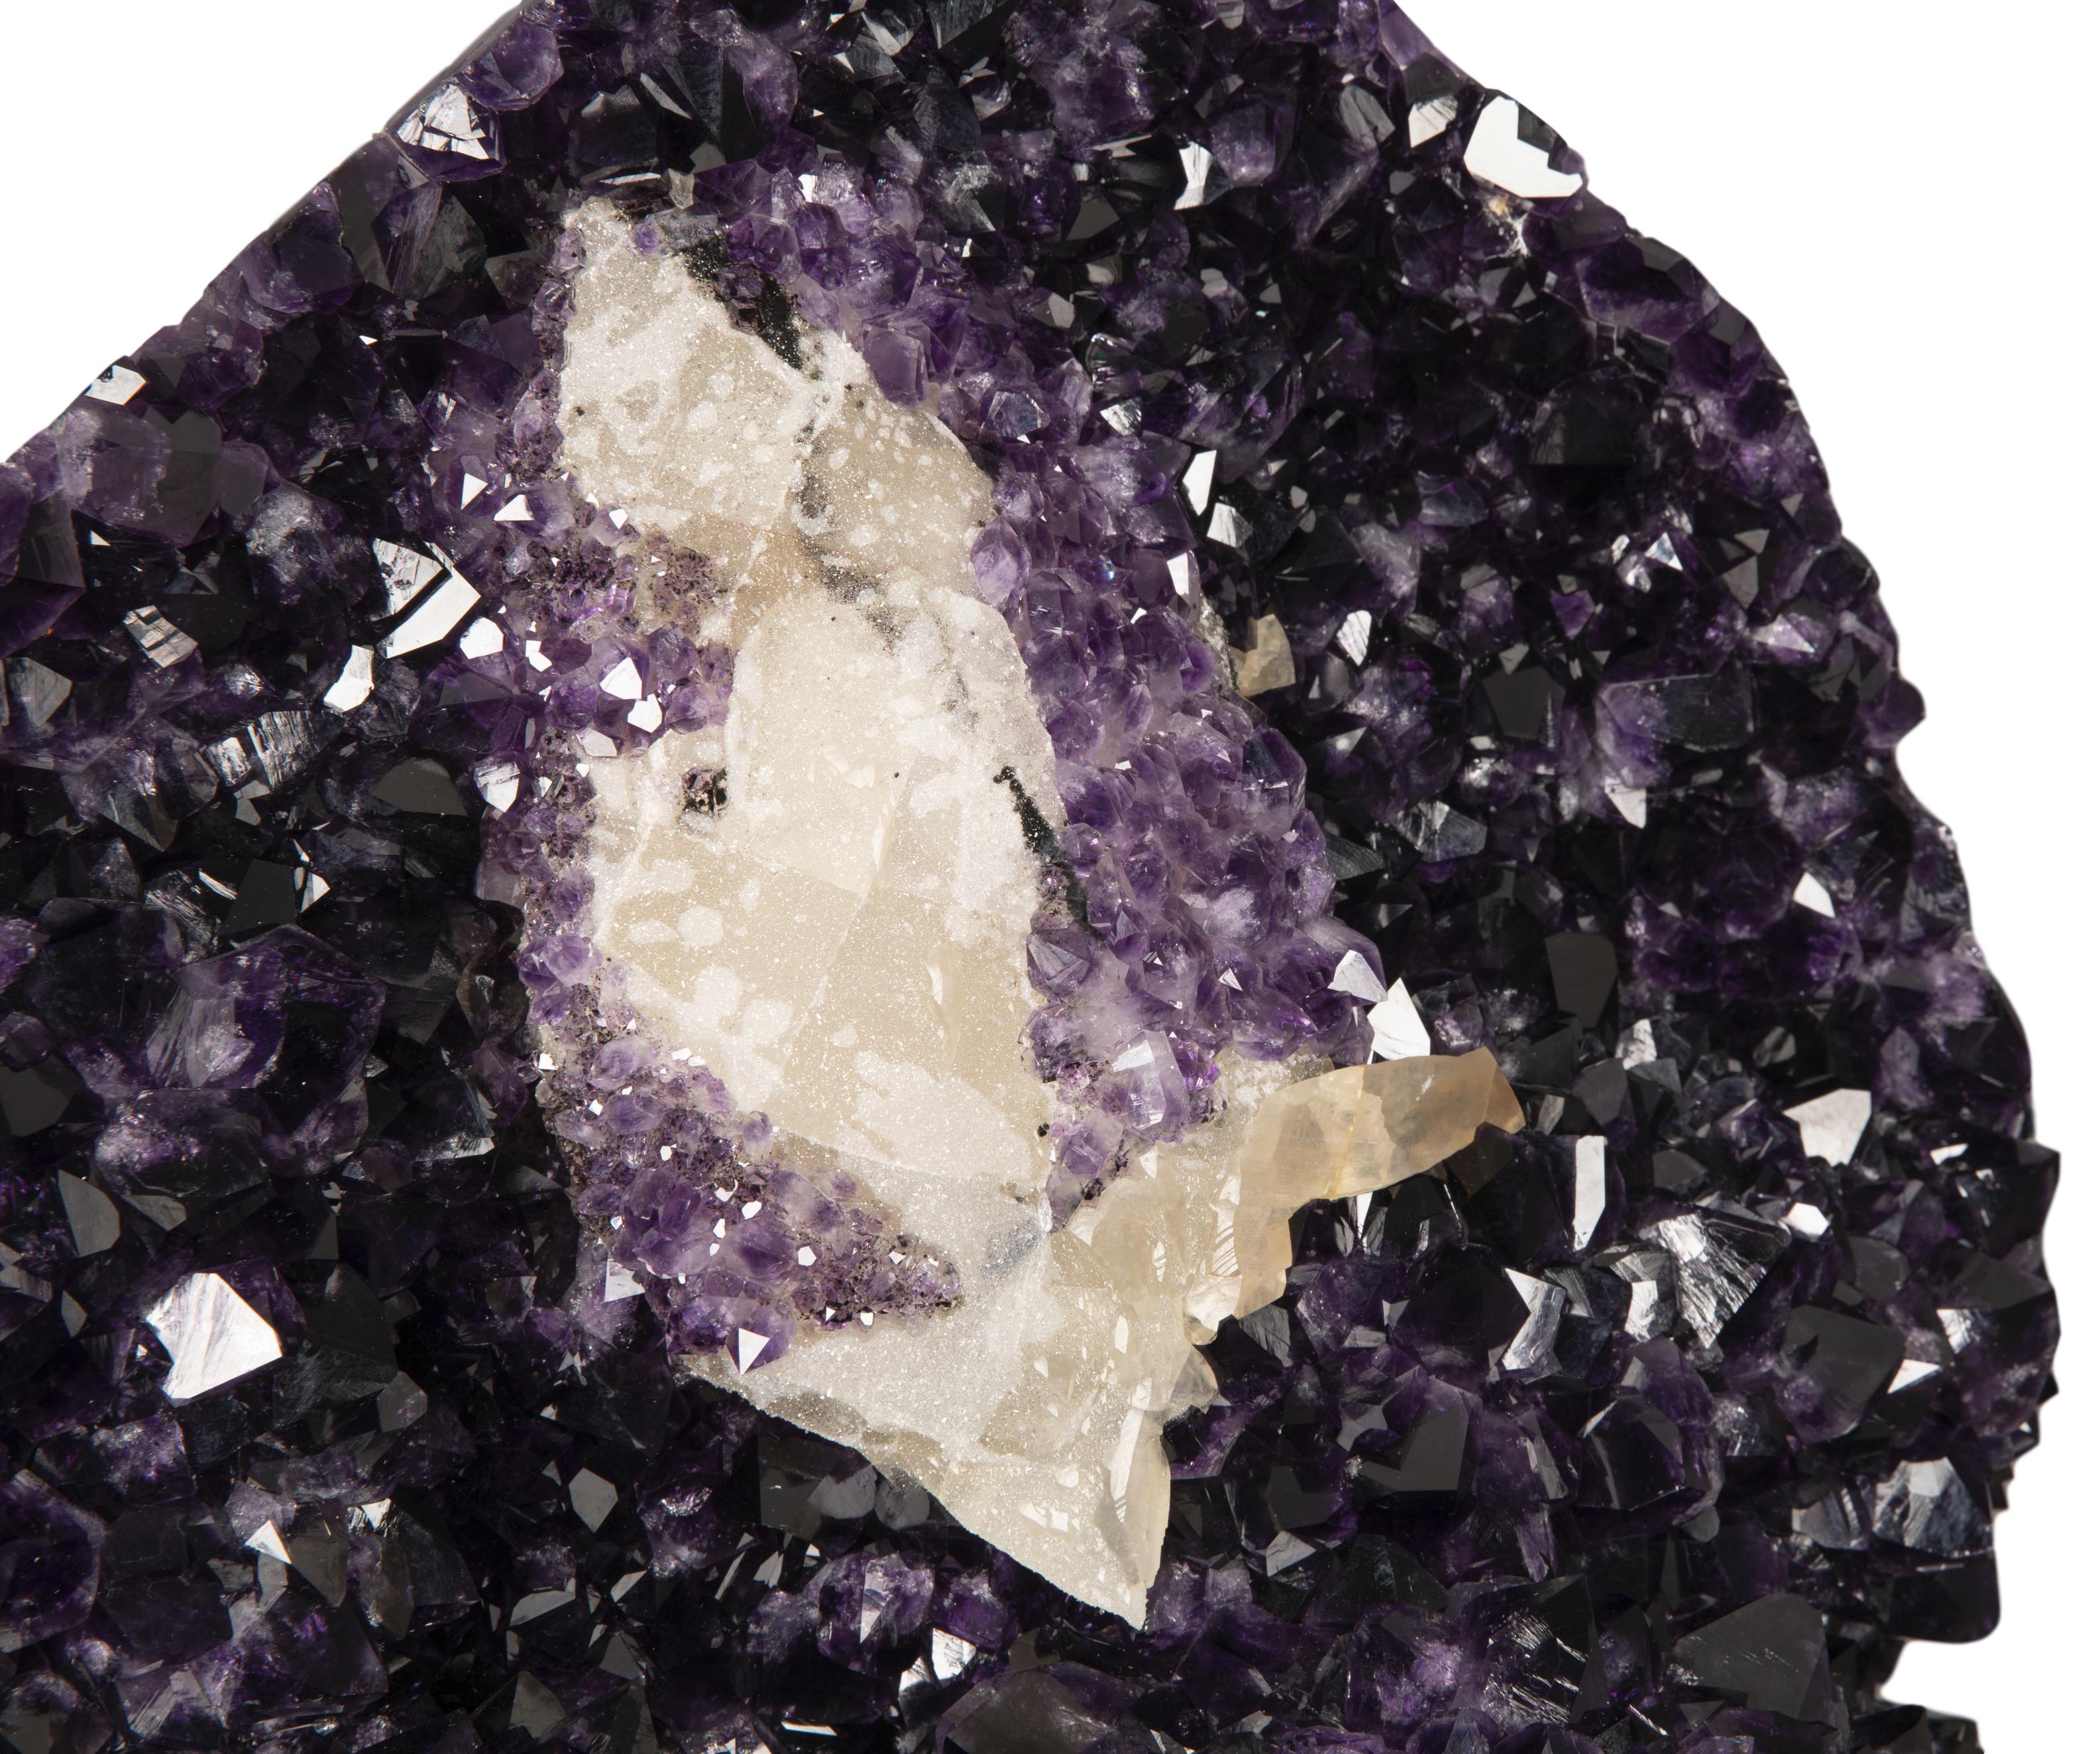 amethyst crystals and black calcite.